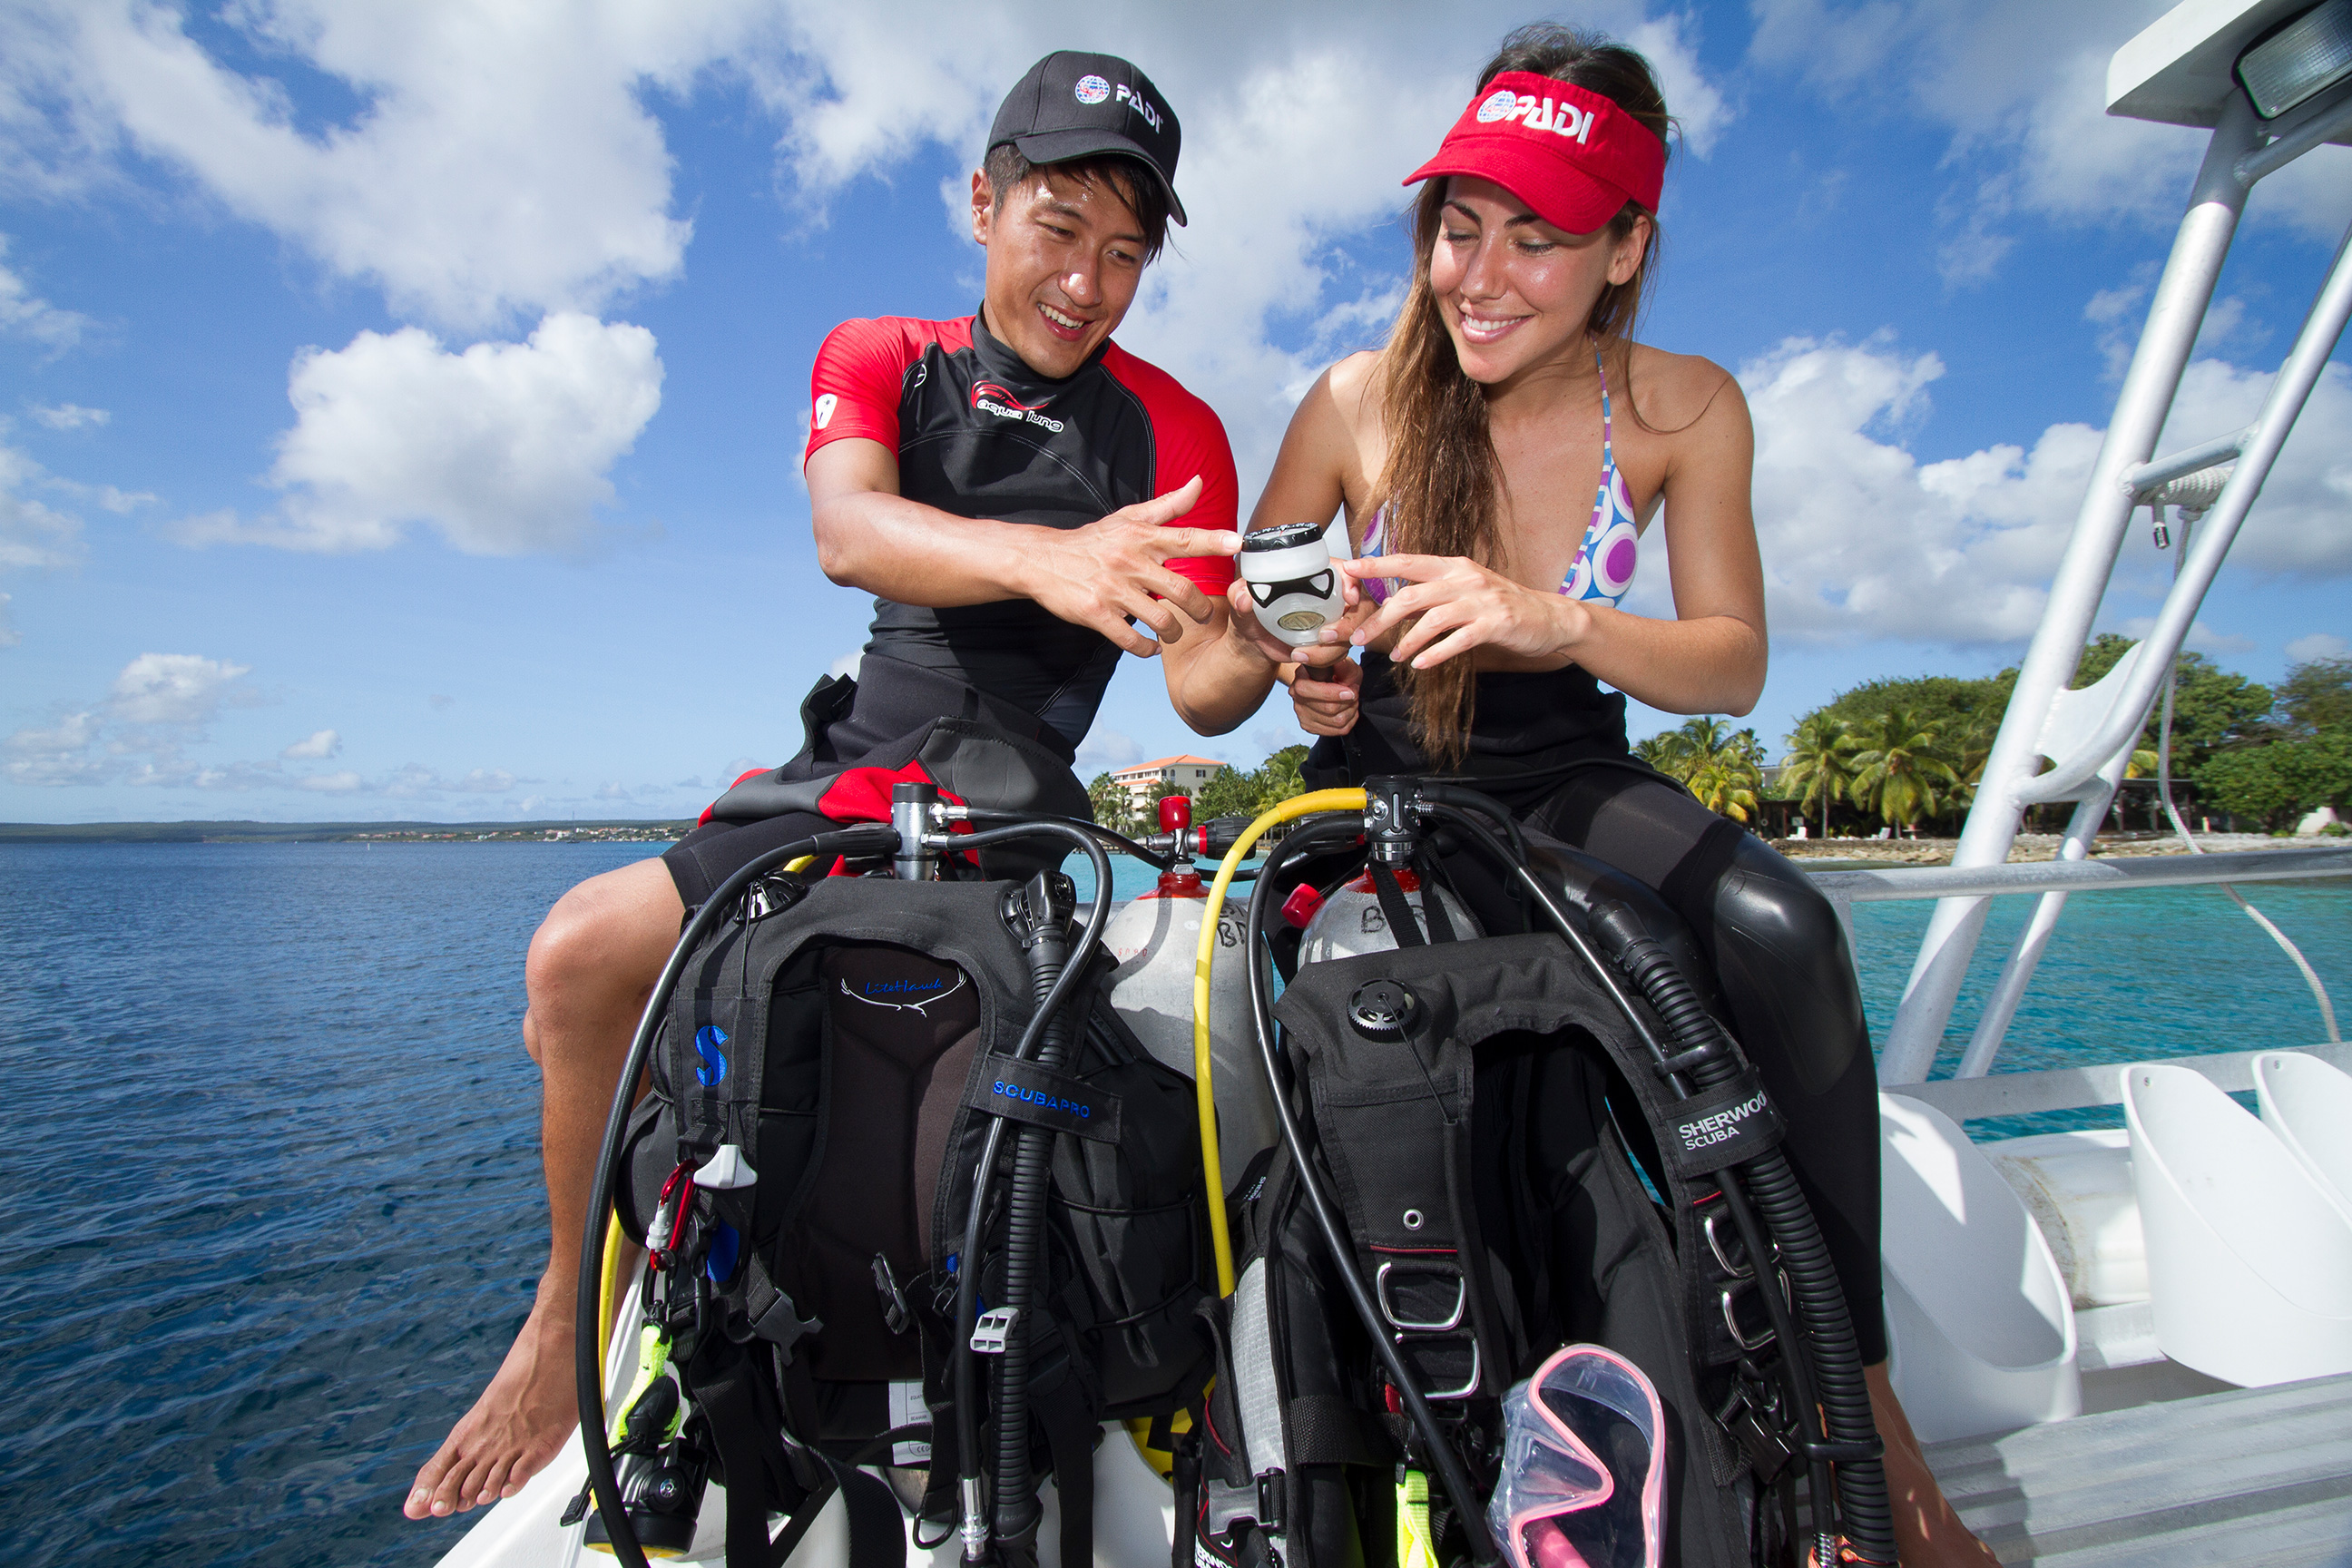 A PADI Instructor shows a student how to check their scuba gear, which is part of the full PADI Open Water Diver course